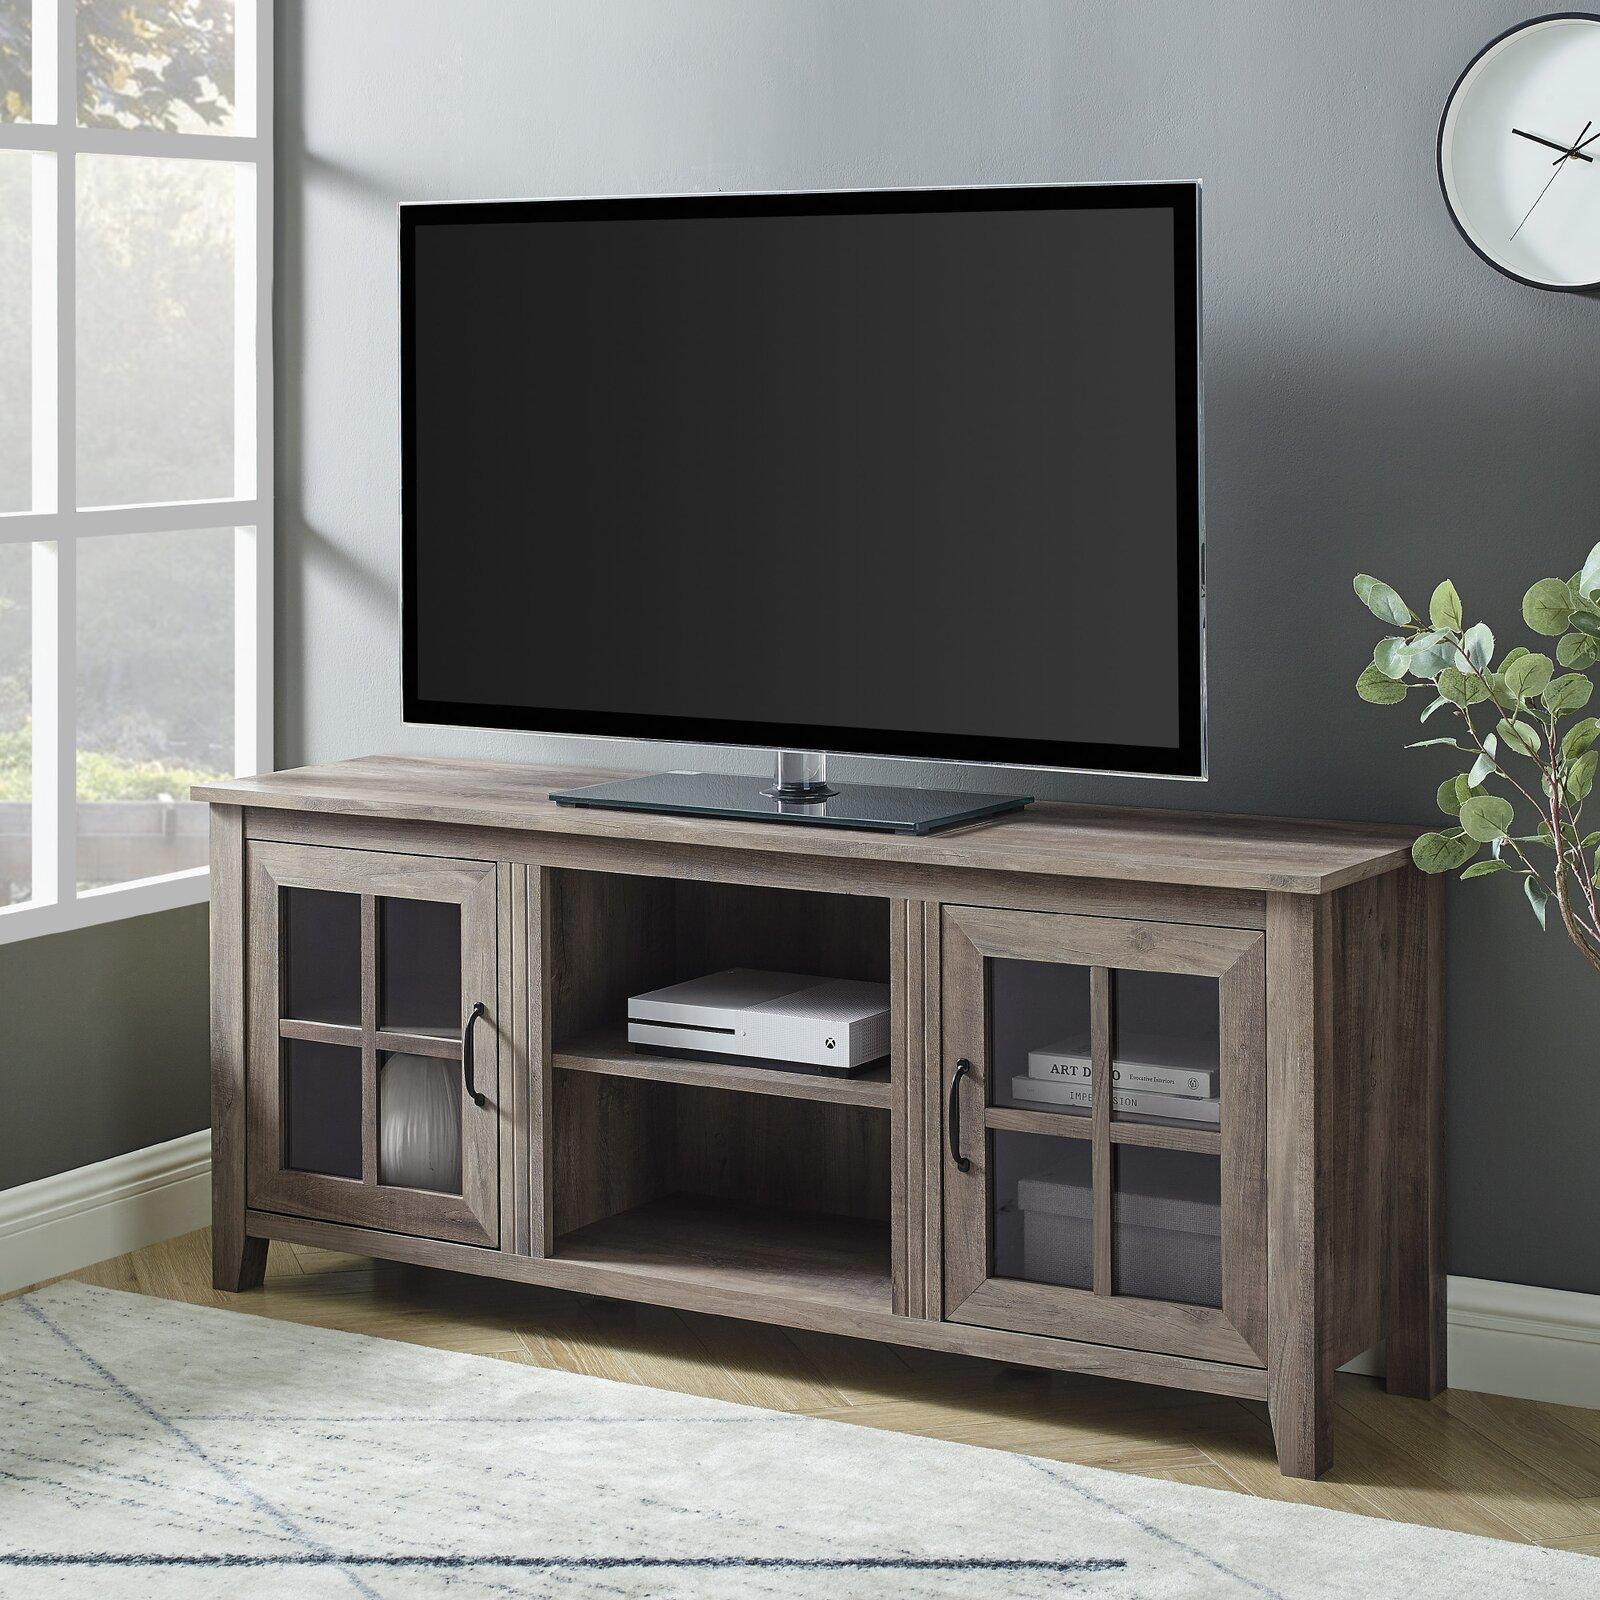 Steelside Clayborn TV Stand for $139.99 Shipped